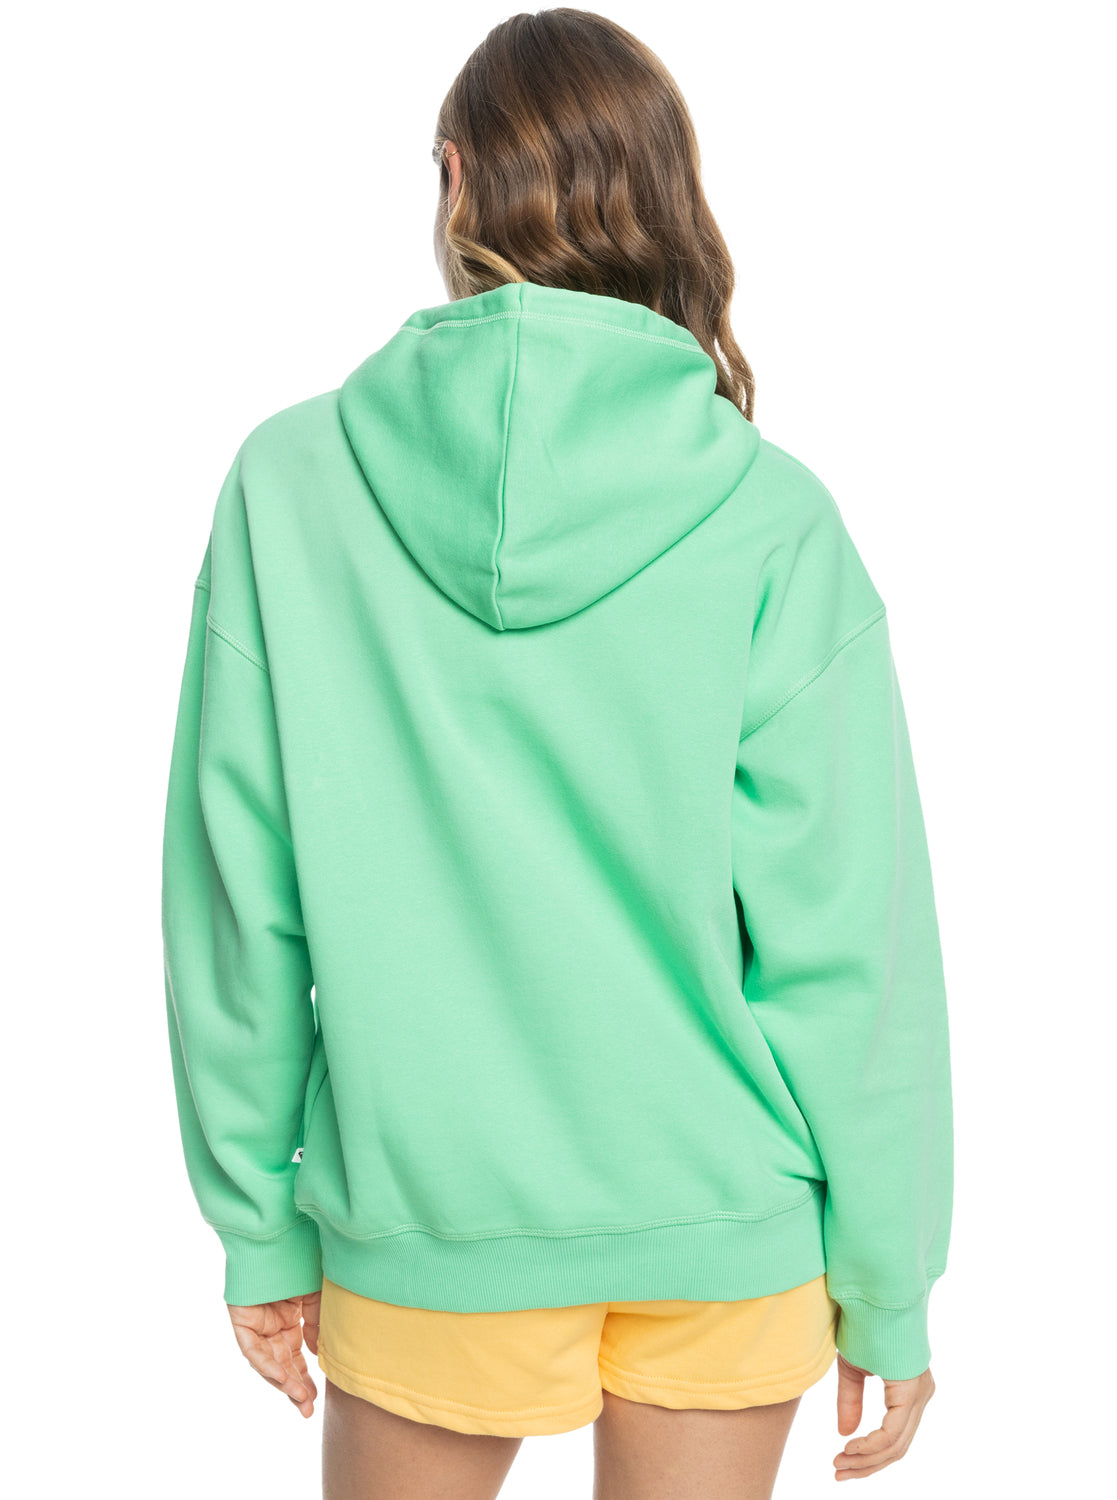 Roxy Thats Rad Hoodie | Roxy | Portwest - The Outdoor Shop